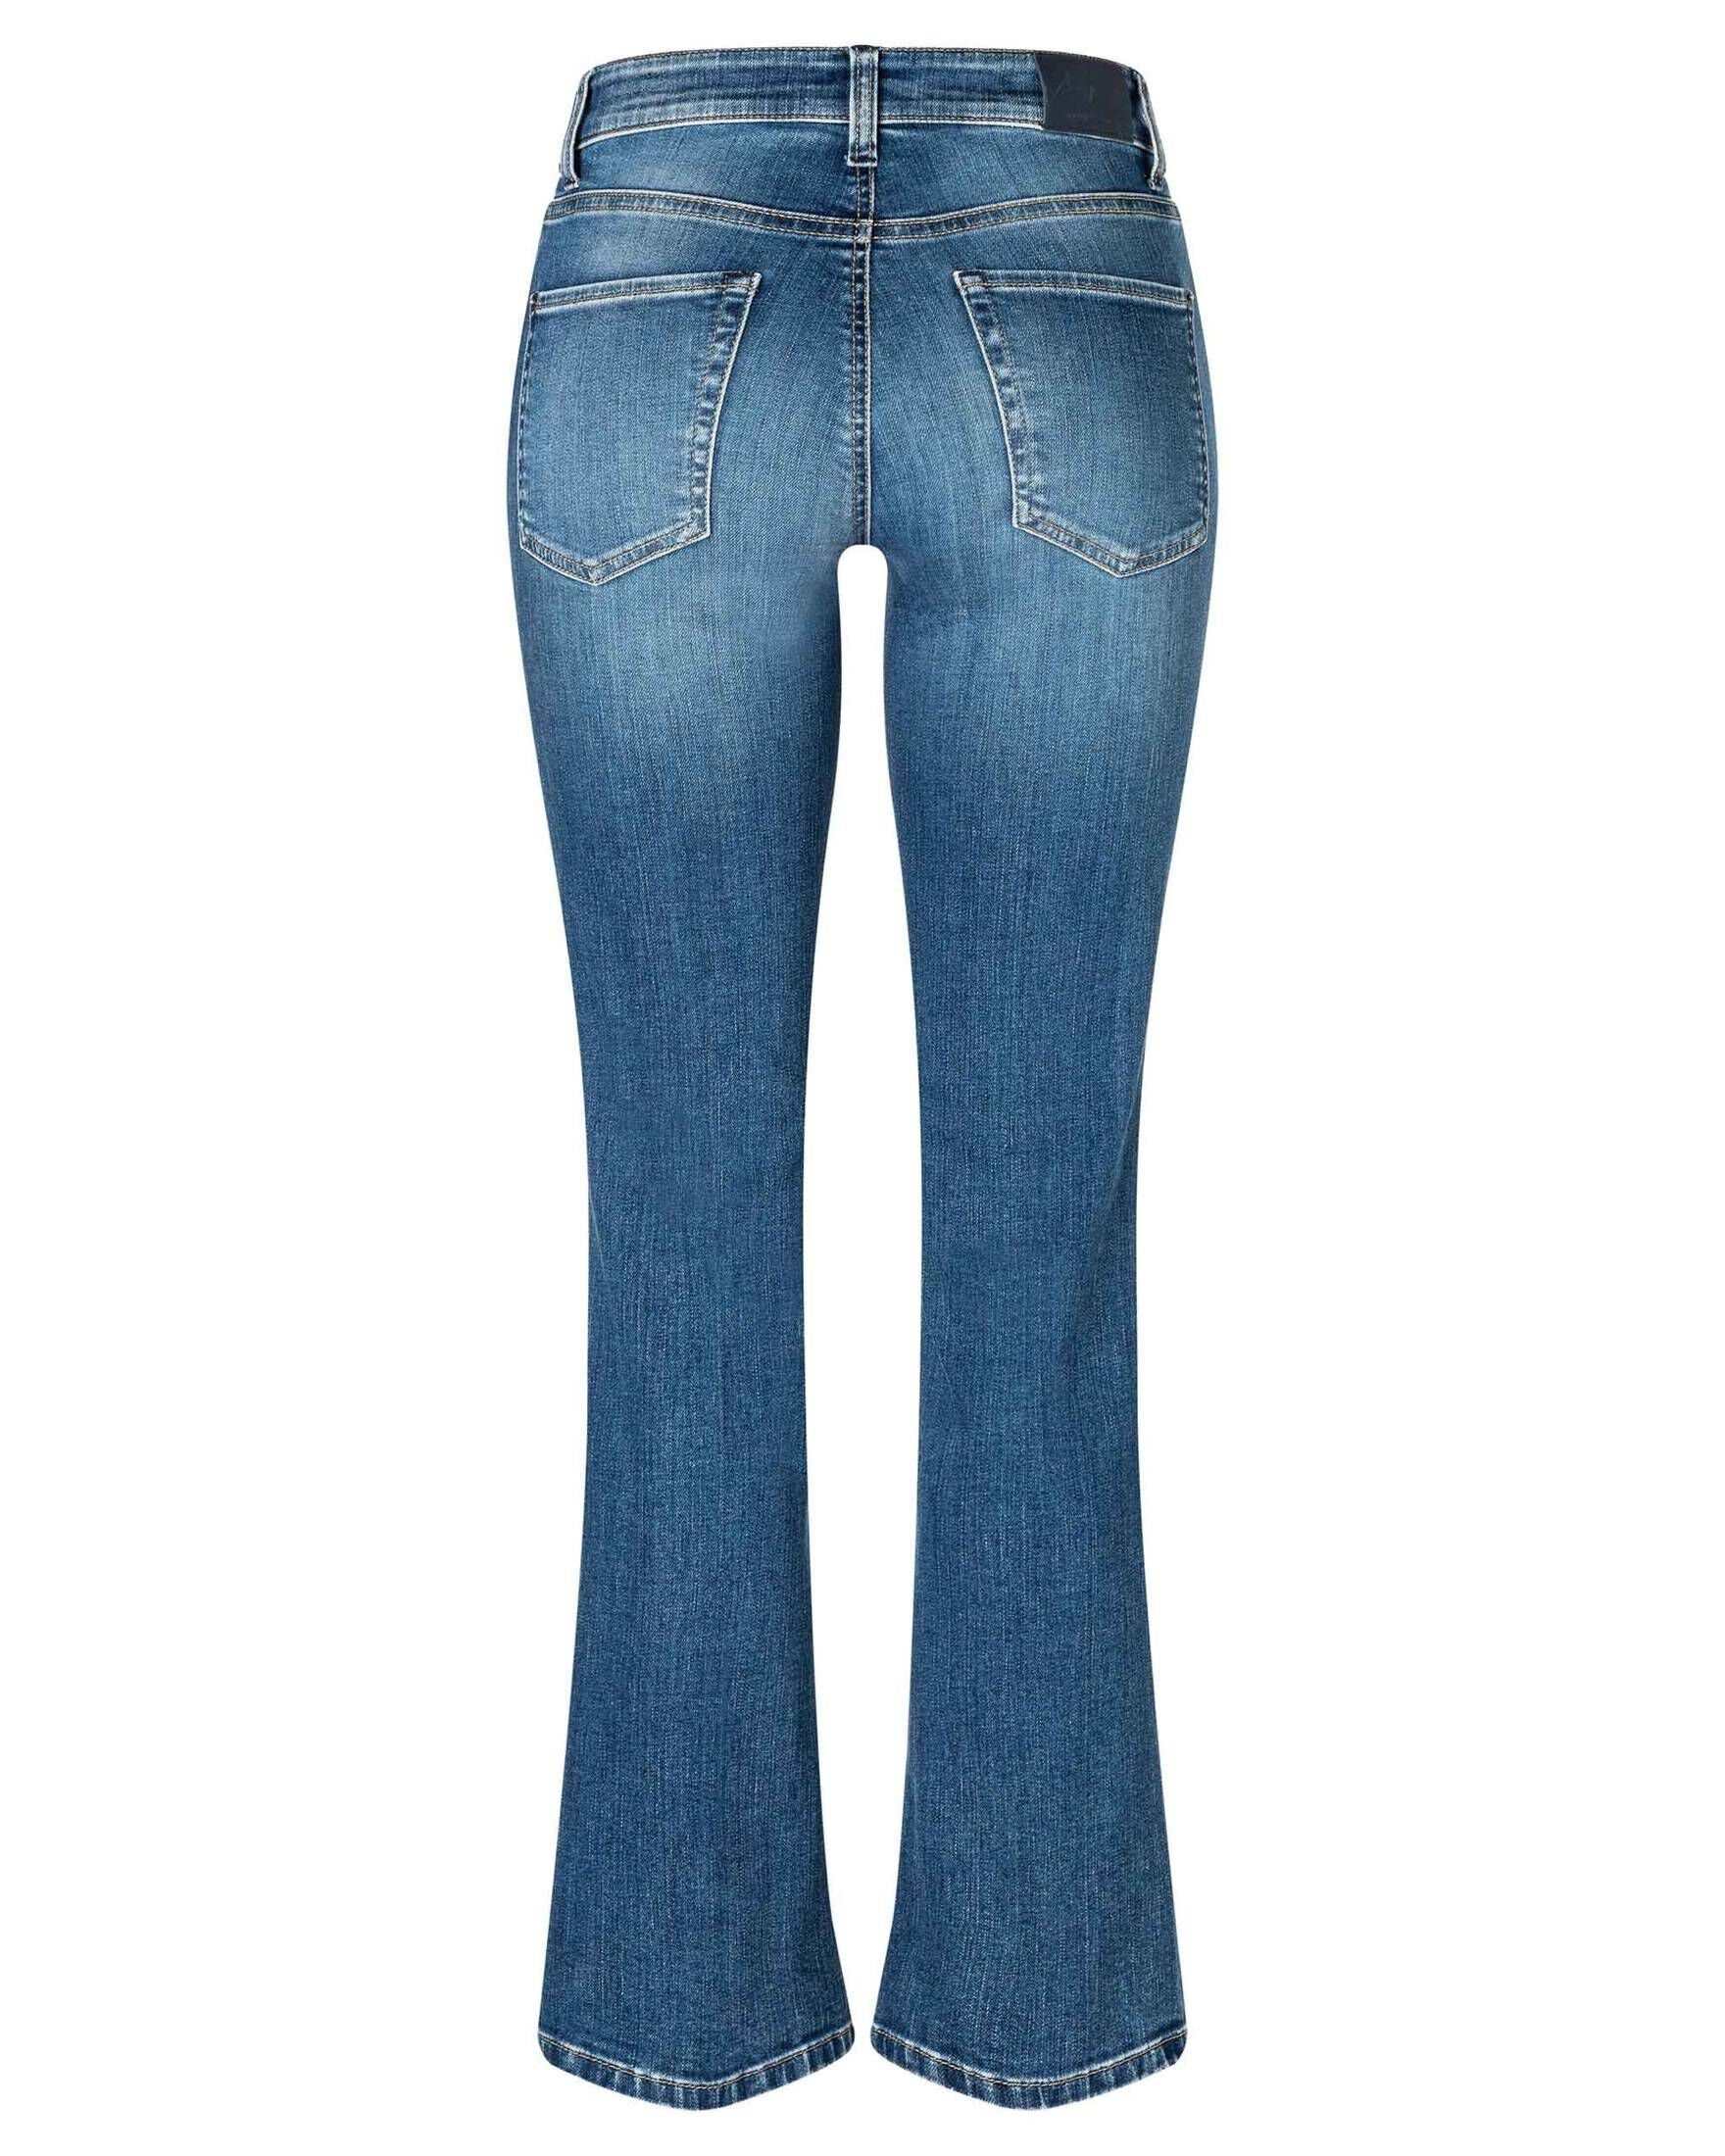 Damen 5-Pocket-Jeans (1-tlg) Bootcutjeans Cambio